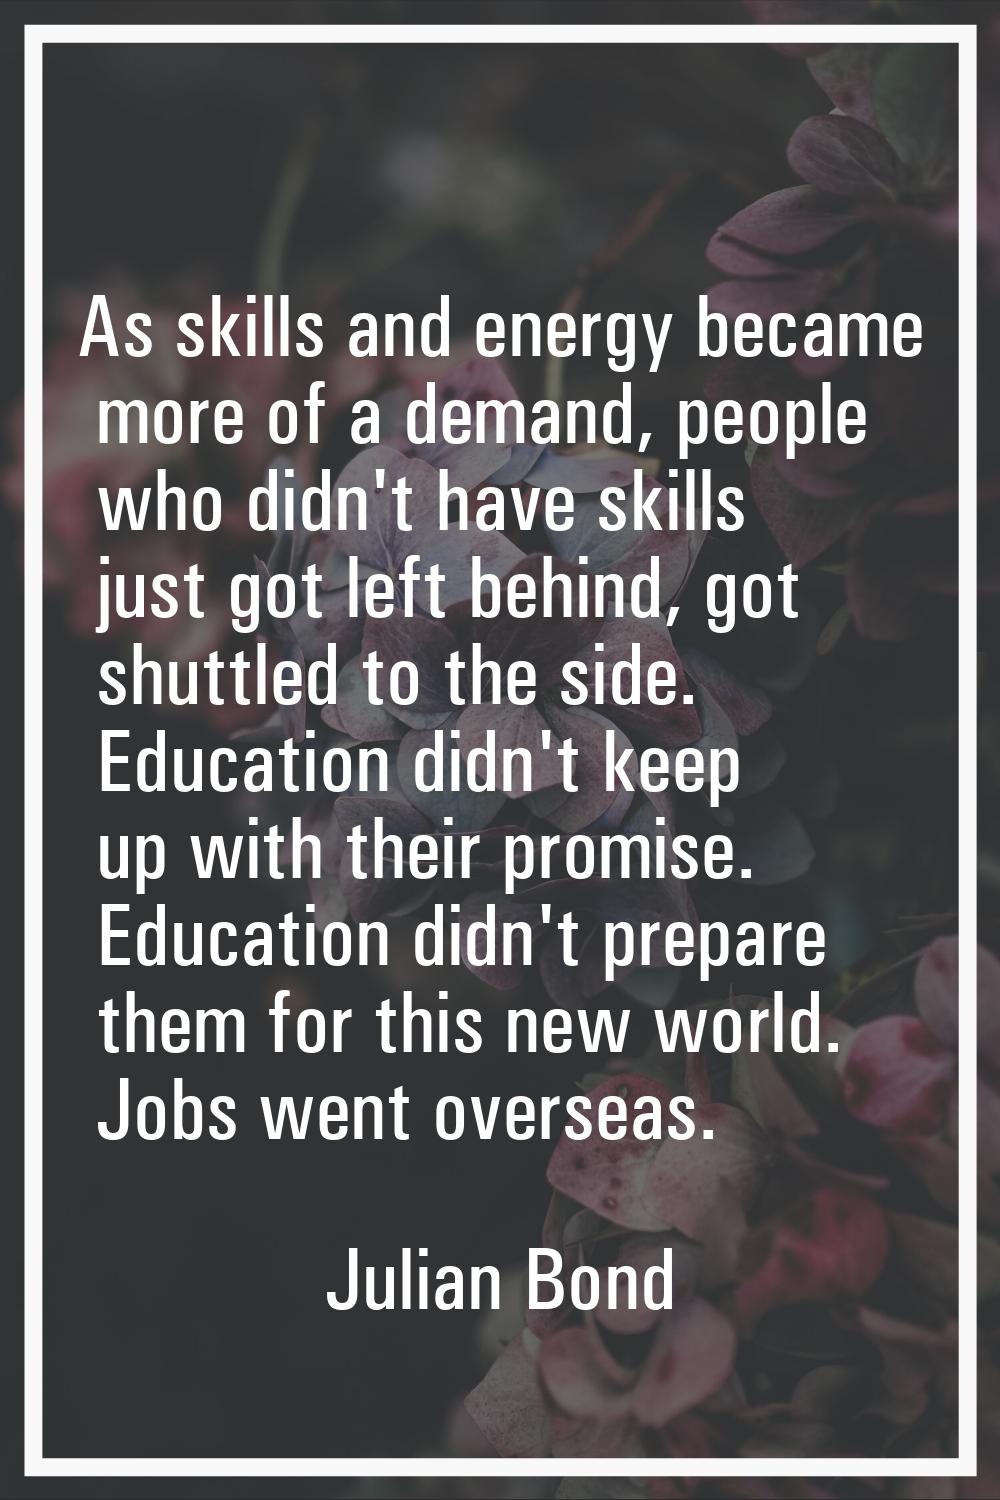 As skills and energy became more of a demand, people who didn't have skills just got left behind, g